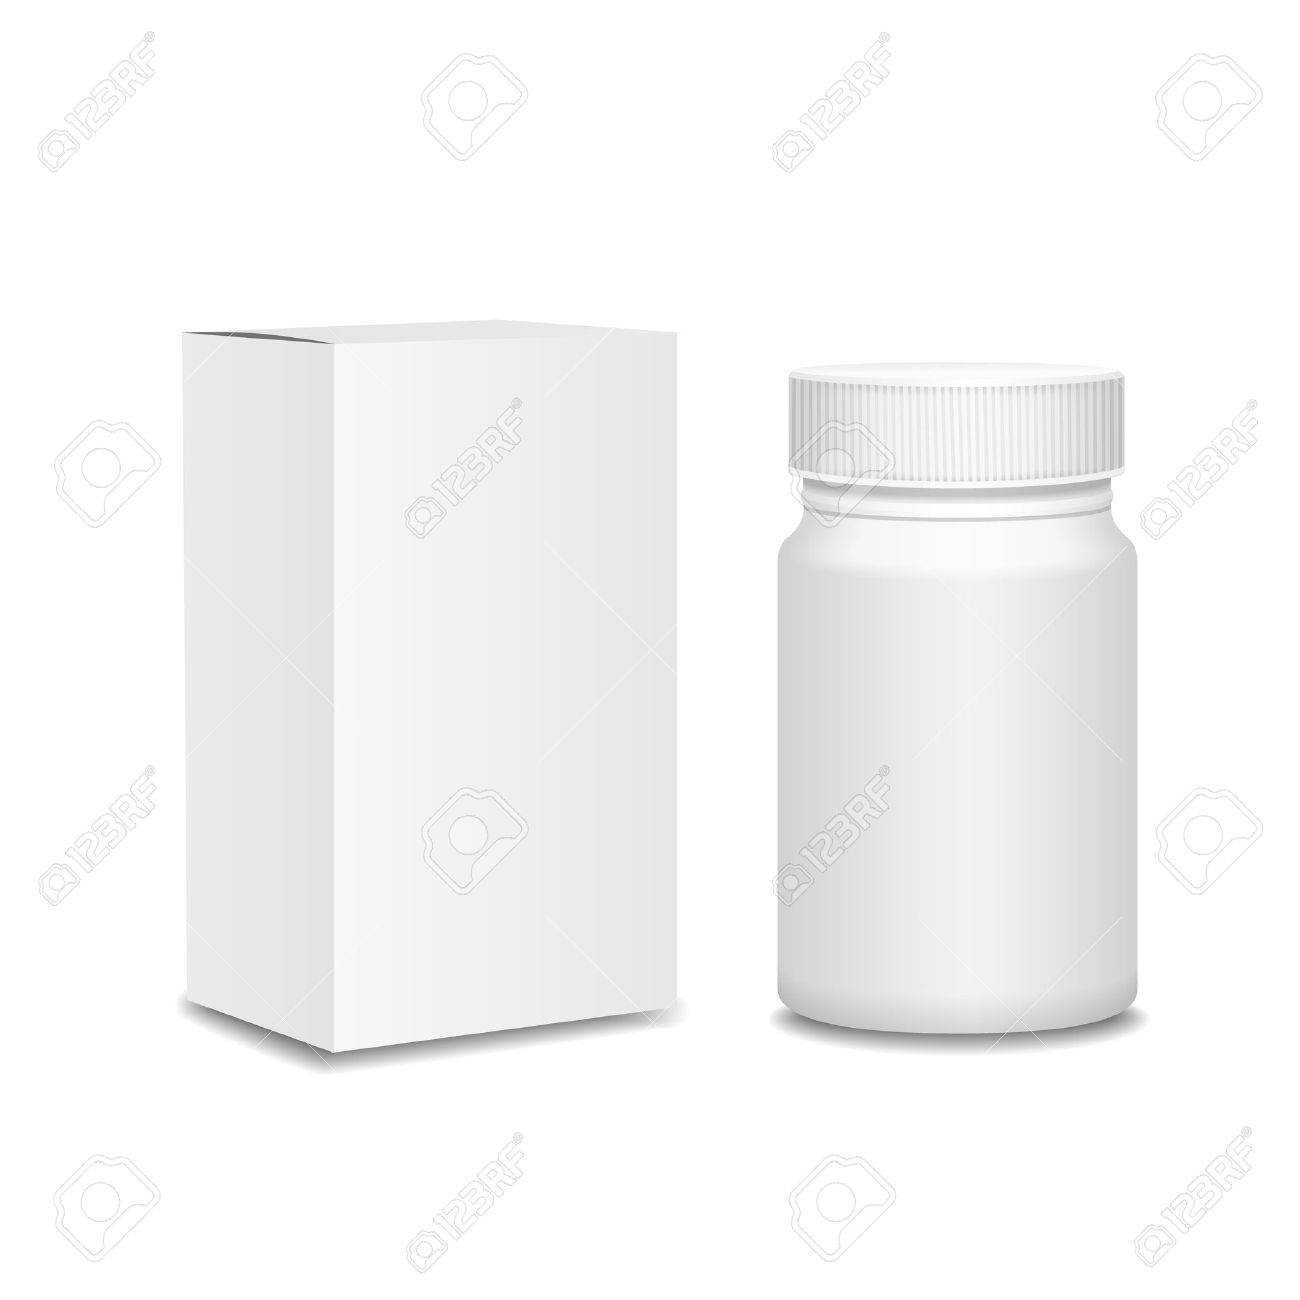 Blank Medicine Bottle And Cardboard Packaging, Vitamins, Examples.. Pertaining To Blank Packaging Templates